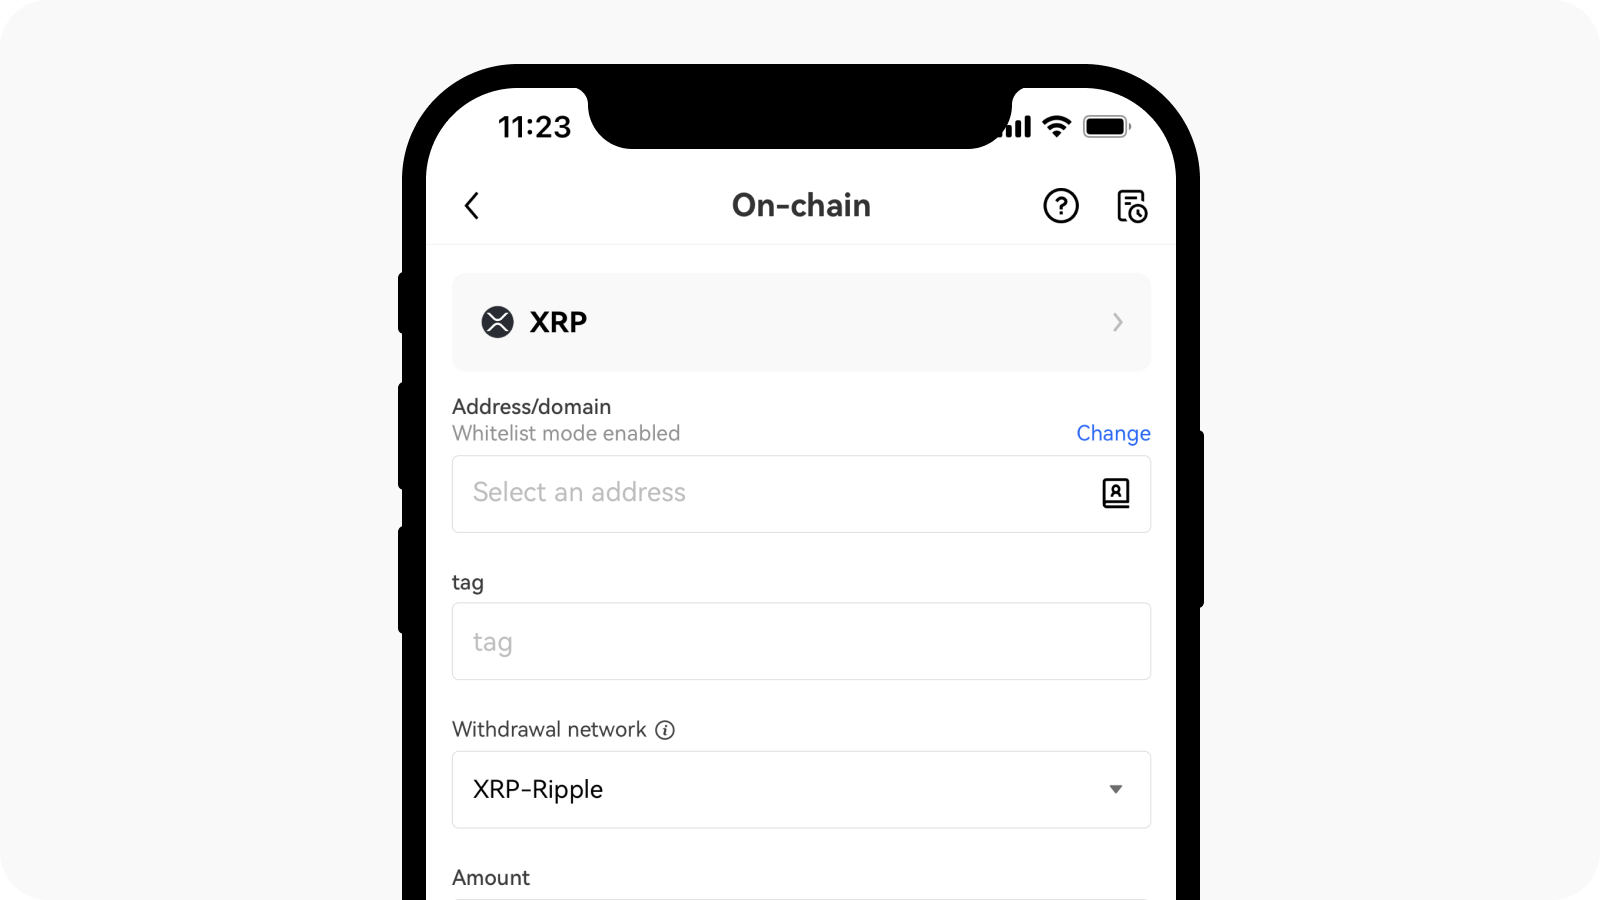 App on chain withdrawal